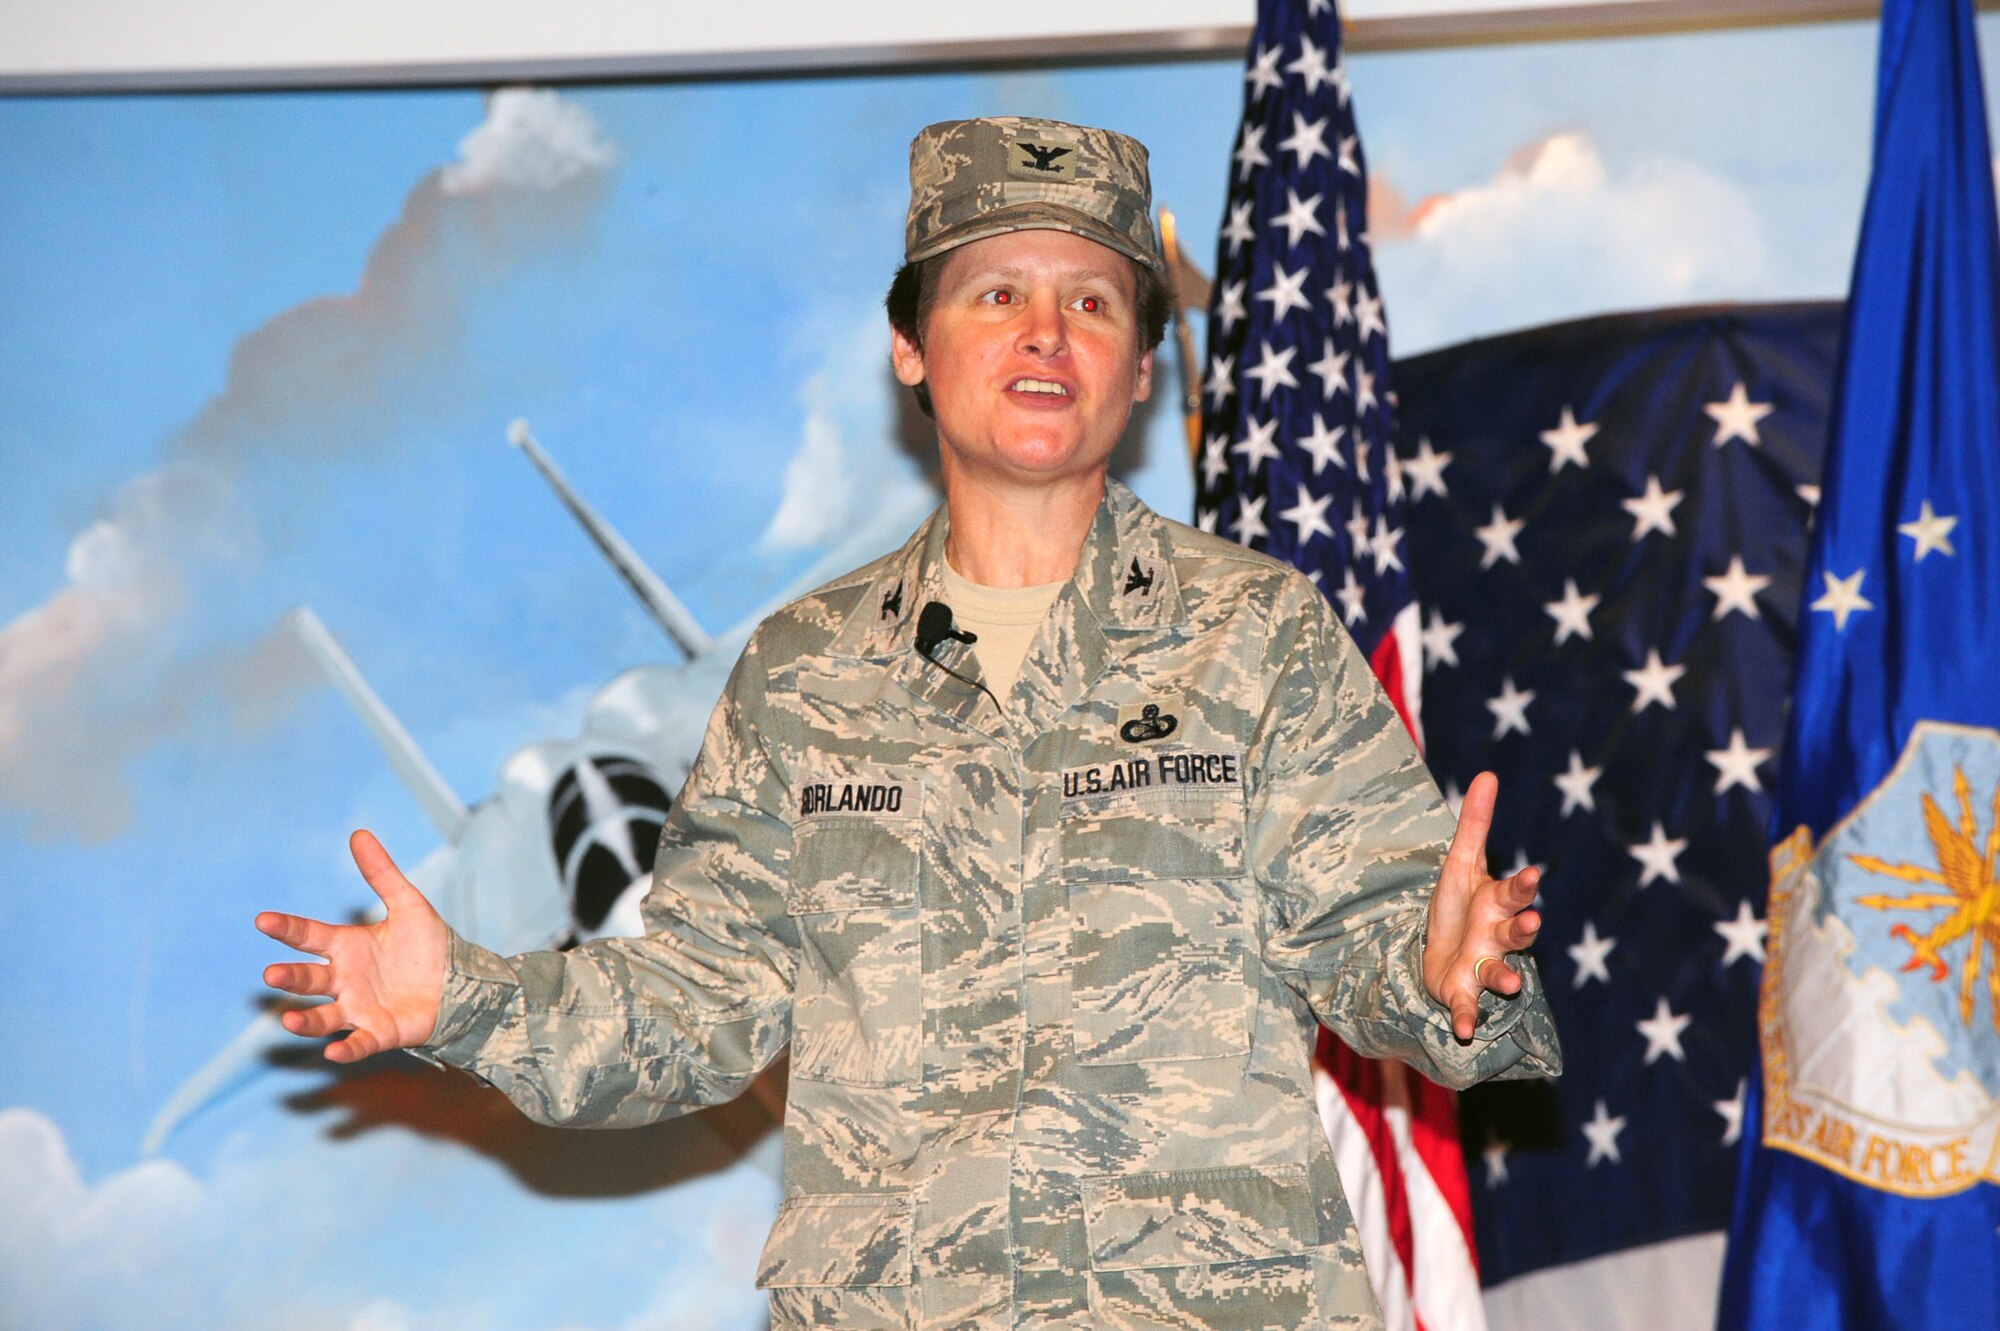 Col. Theresa Giorlando is the first commander of the new 689th Combat Communications Wing. U.S. Air Force Photo by Ray Crayton